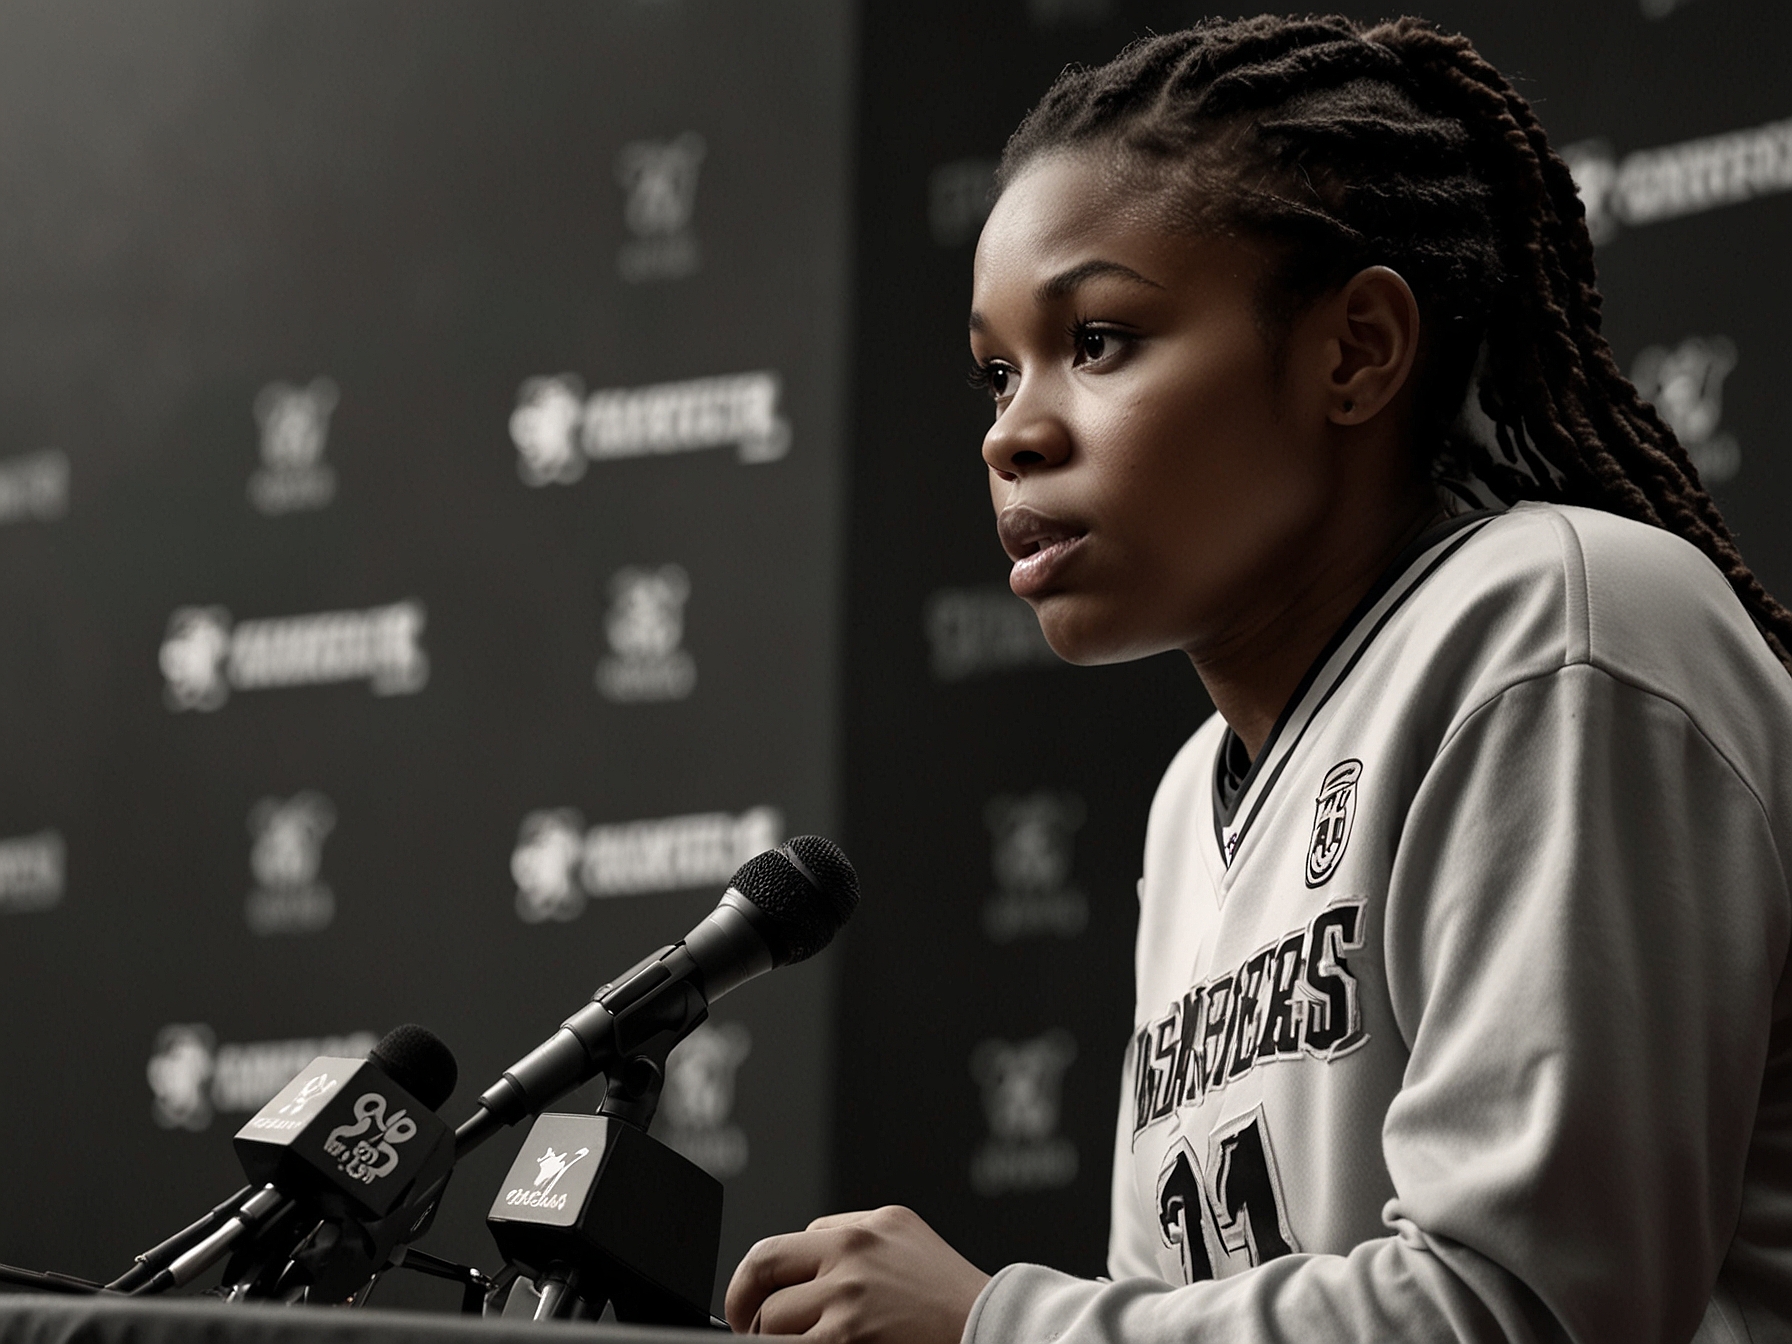 Post-game, Angel Reese addresses the media, explaining her perspective on the controversial foul. Her determined expression captures the intensity and passion she brings to the sport.